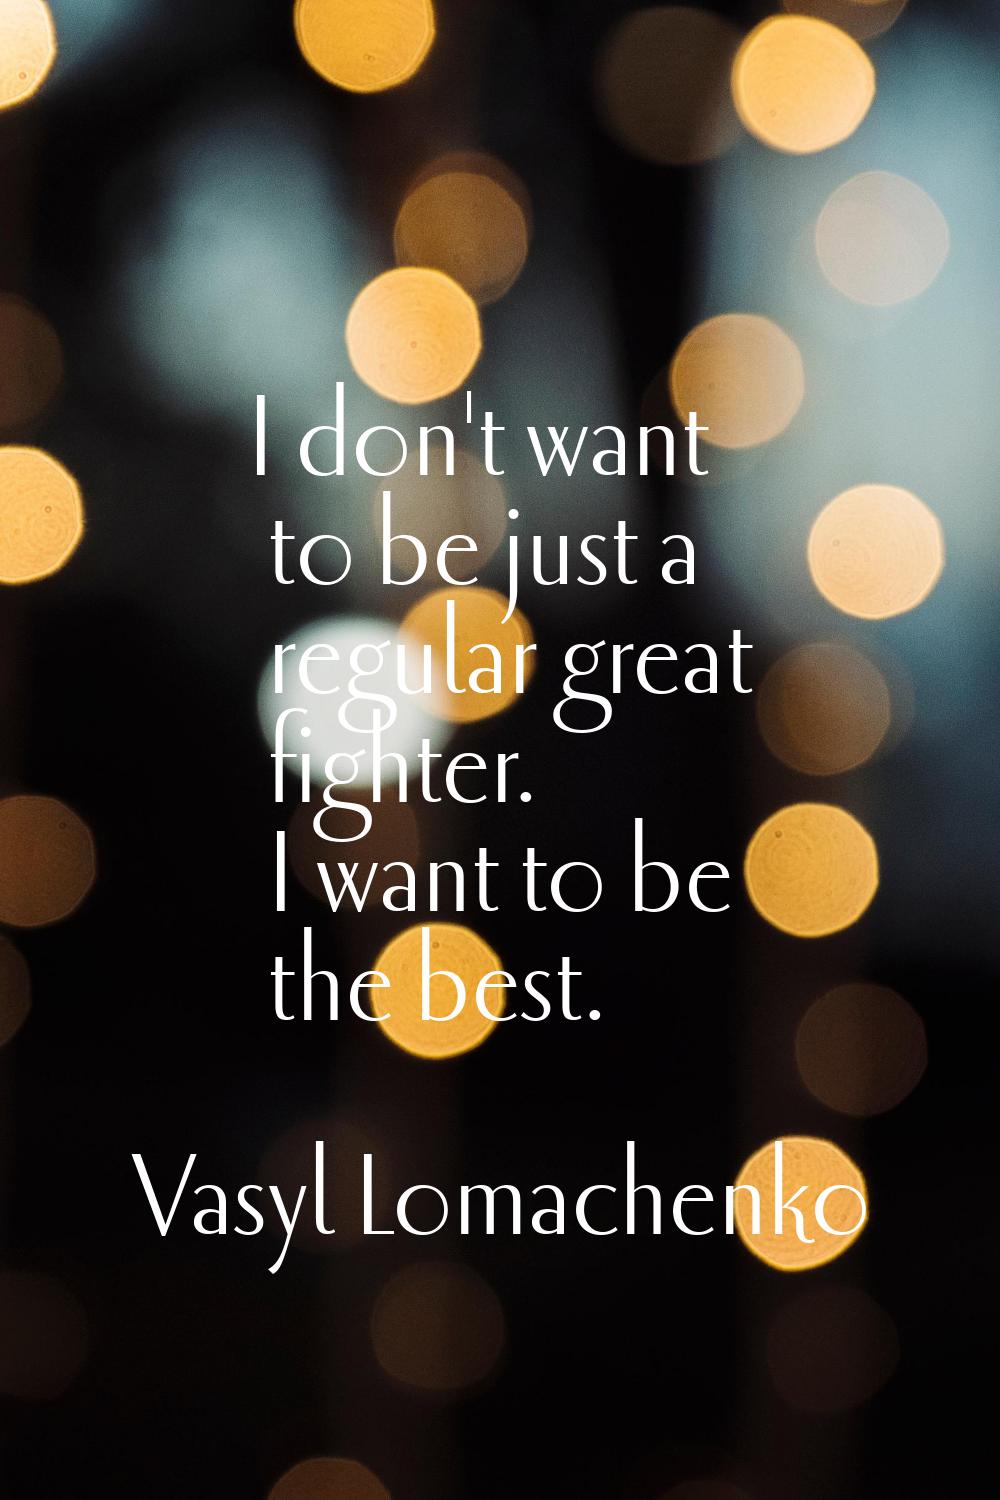 I don't want to be just a regular great fighter. I want to be the best.